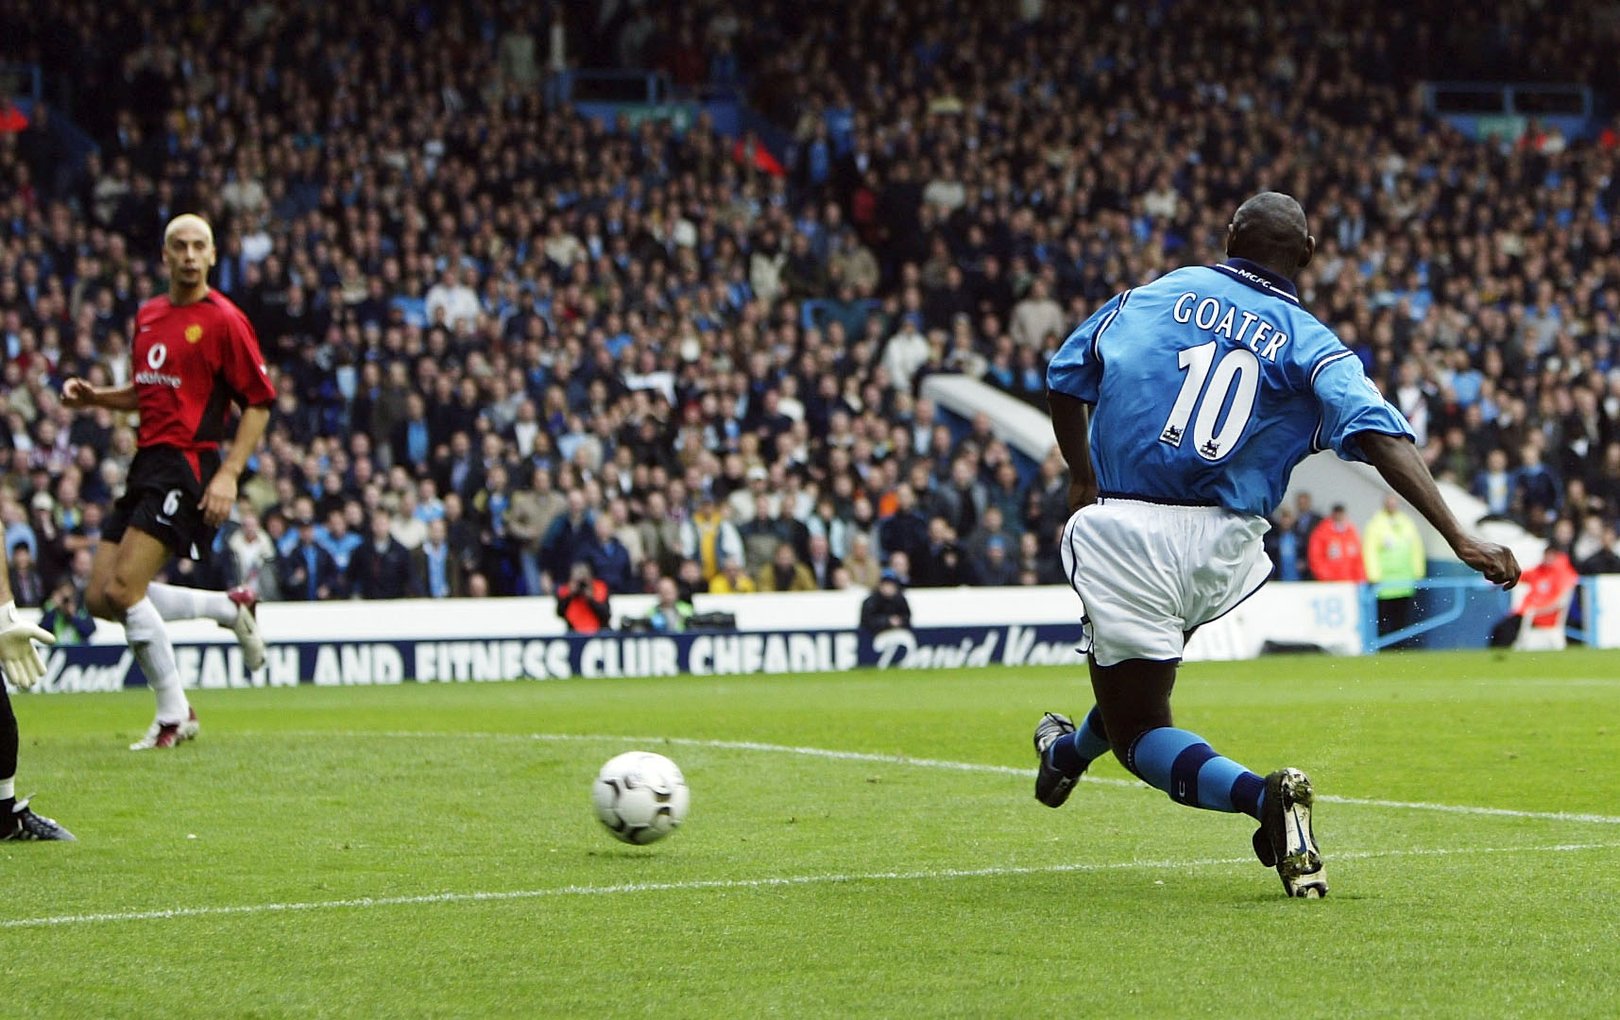 Shaun Goater scoring in the Manchester Derby